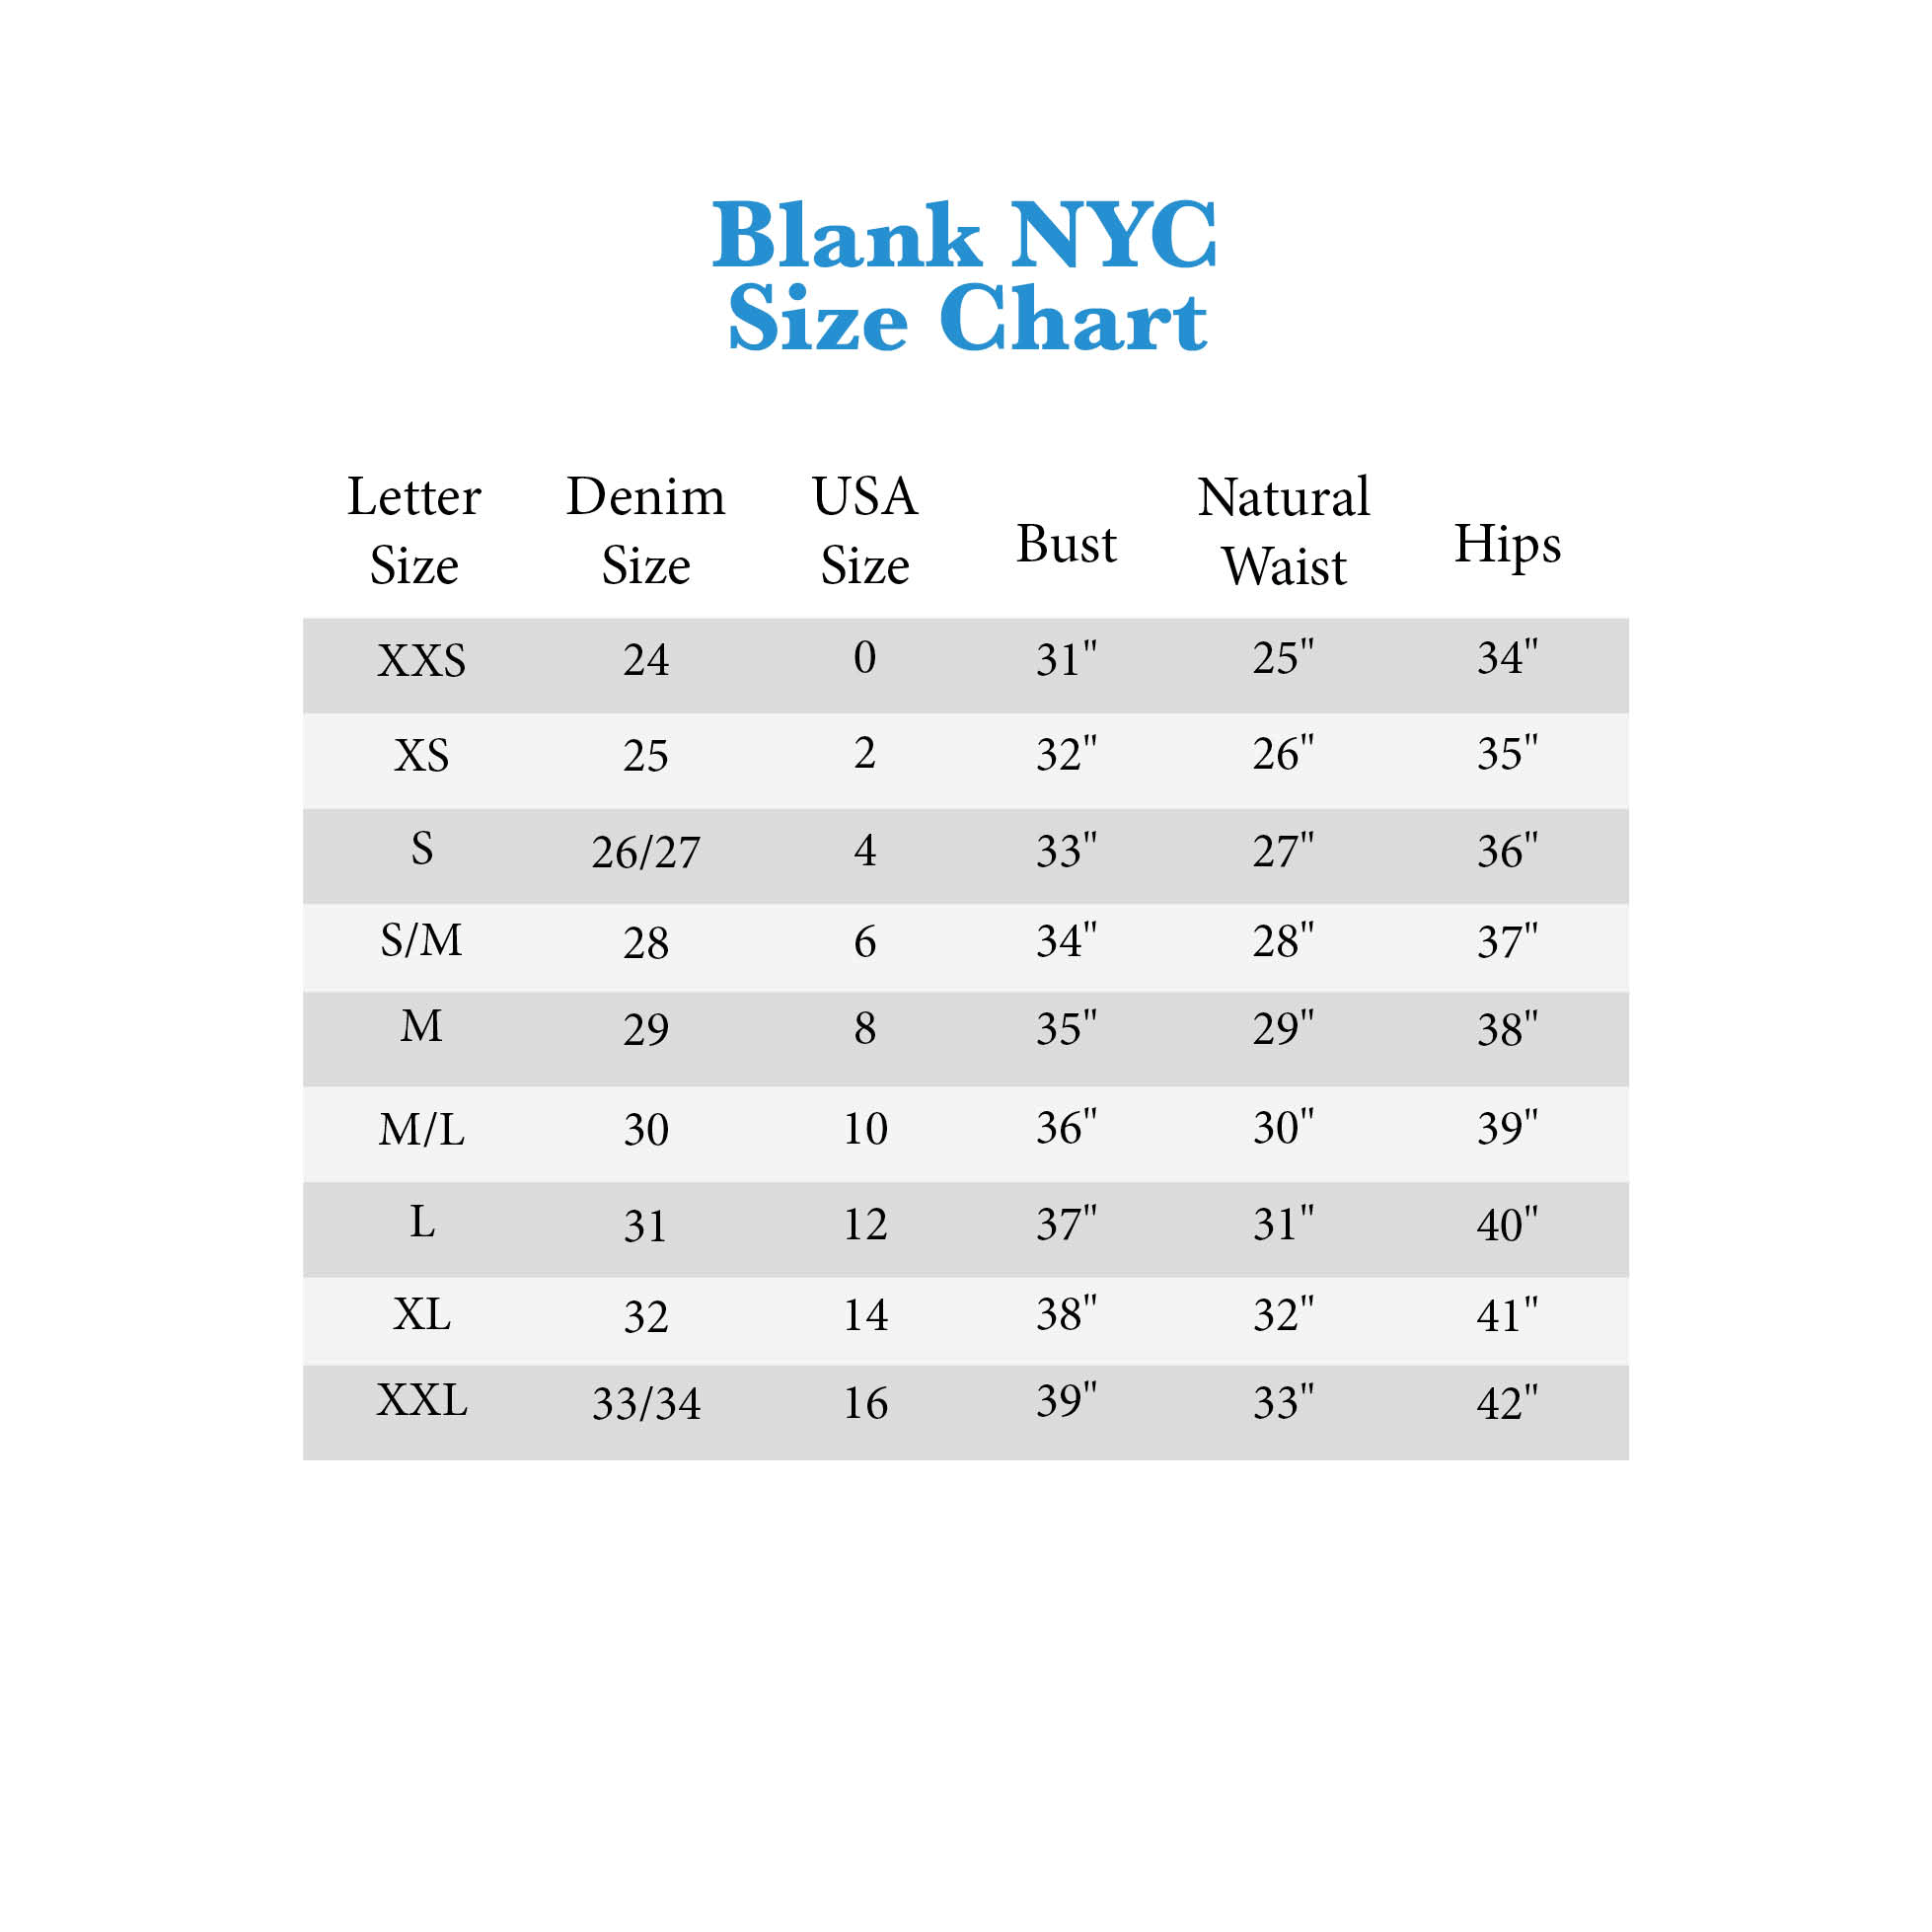 Blank Nyc Size Chart